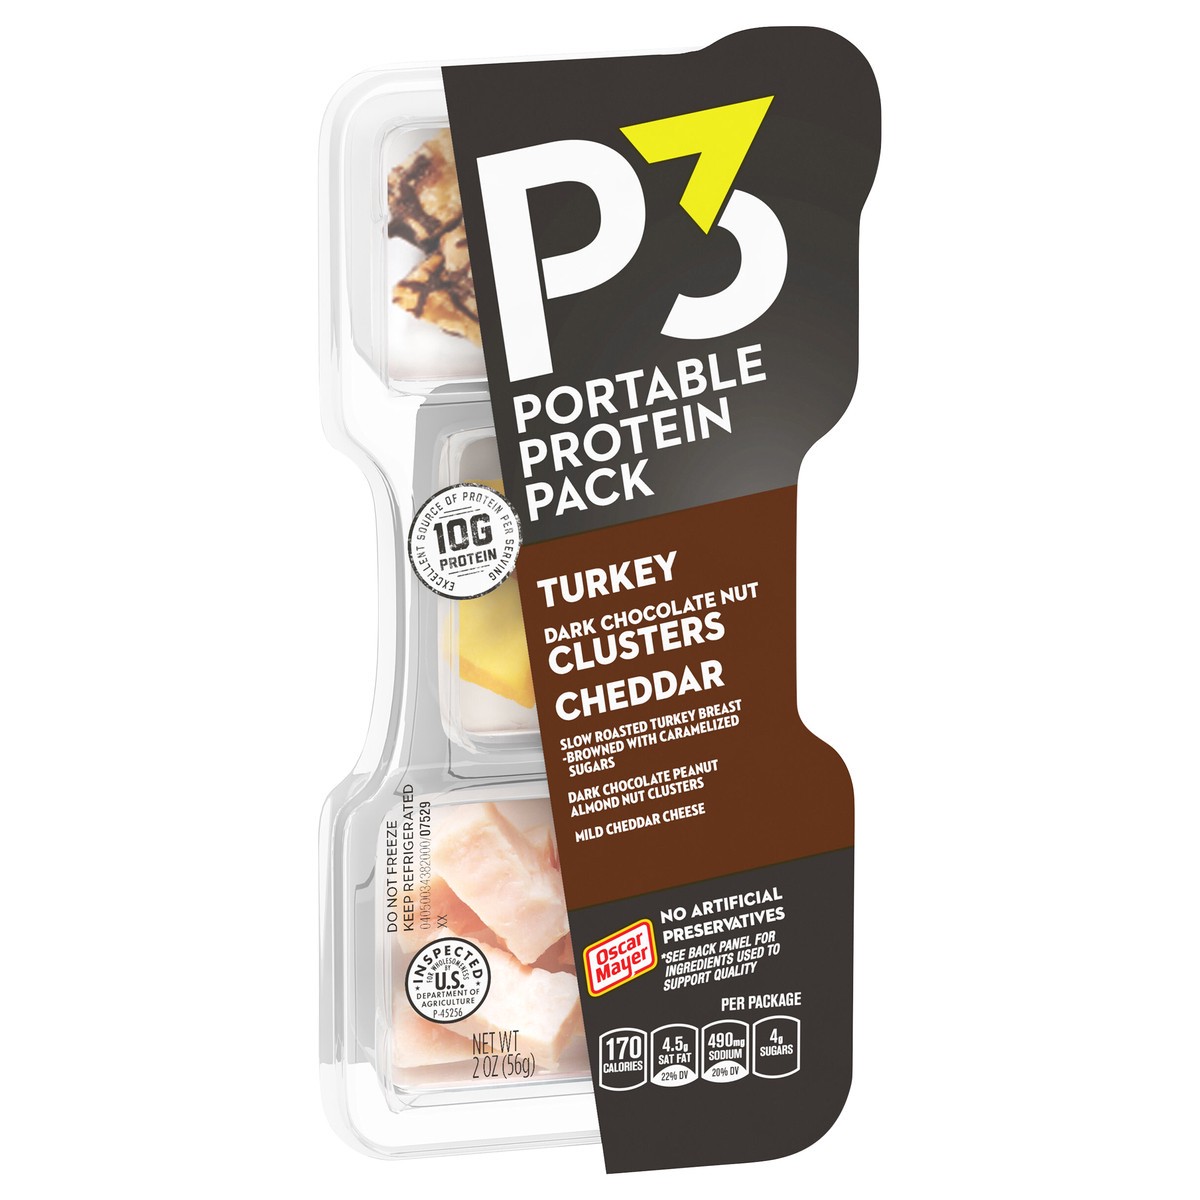 slide 3 of 9, P3 Portable Protein Snack Pack with Dark Chocolate Almond Nut Clusters, Turkey & Cheddar Cheese, 2 oz Tray, 2 oz